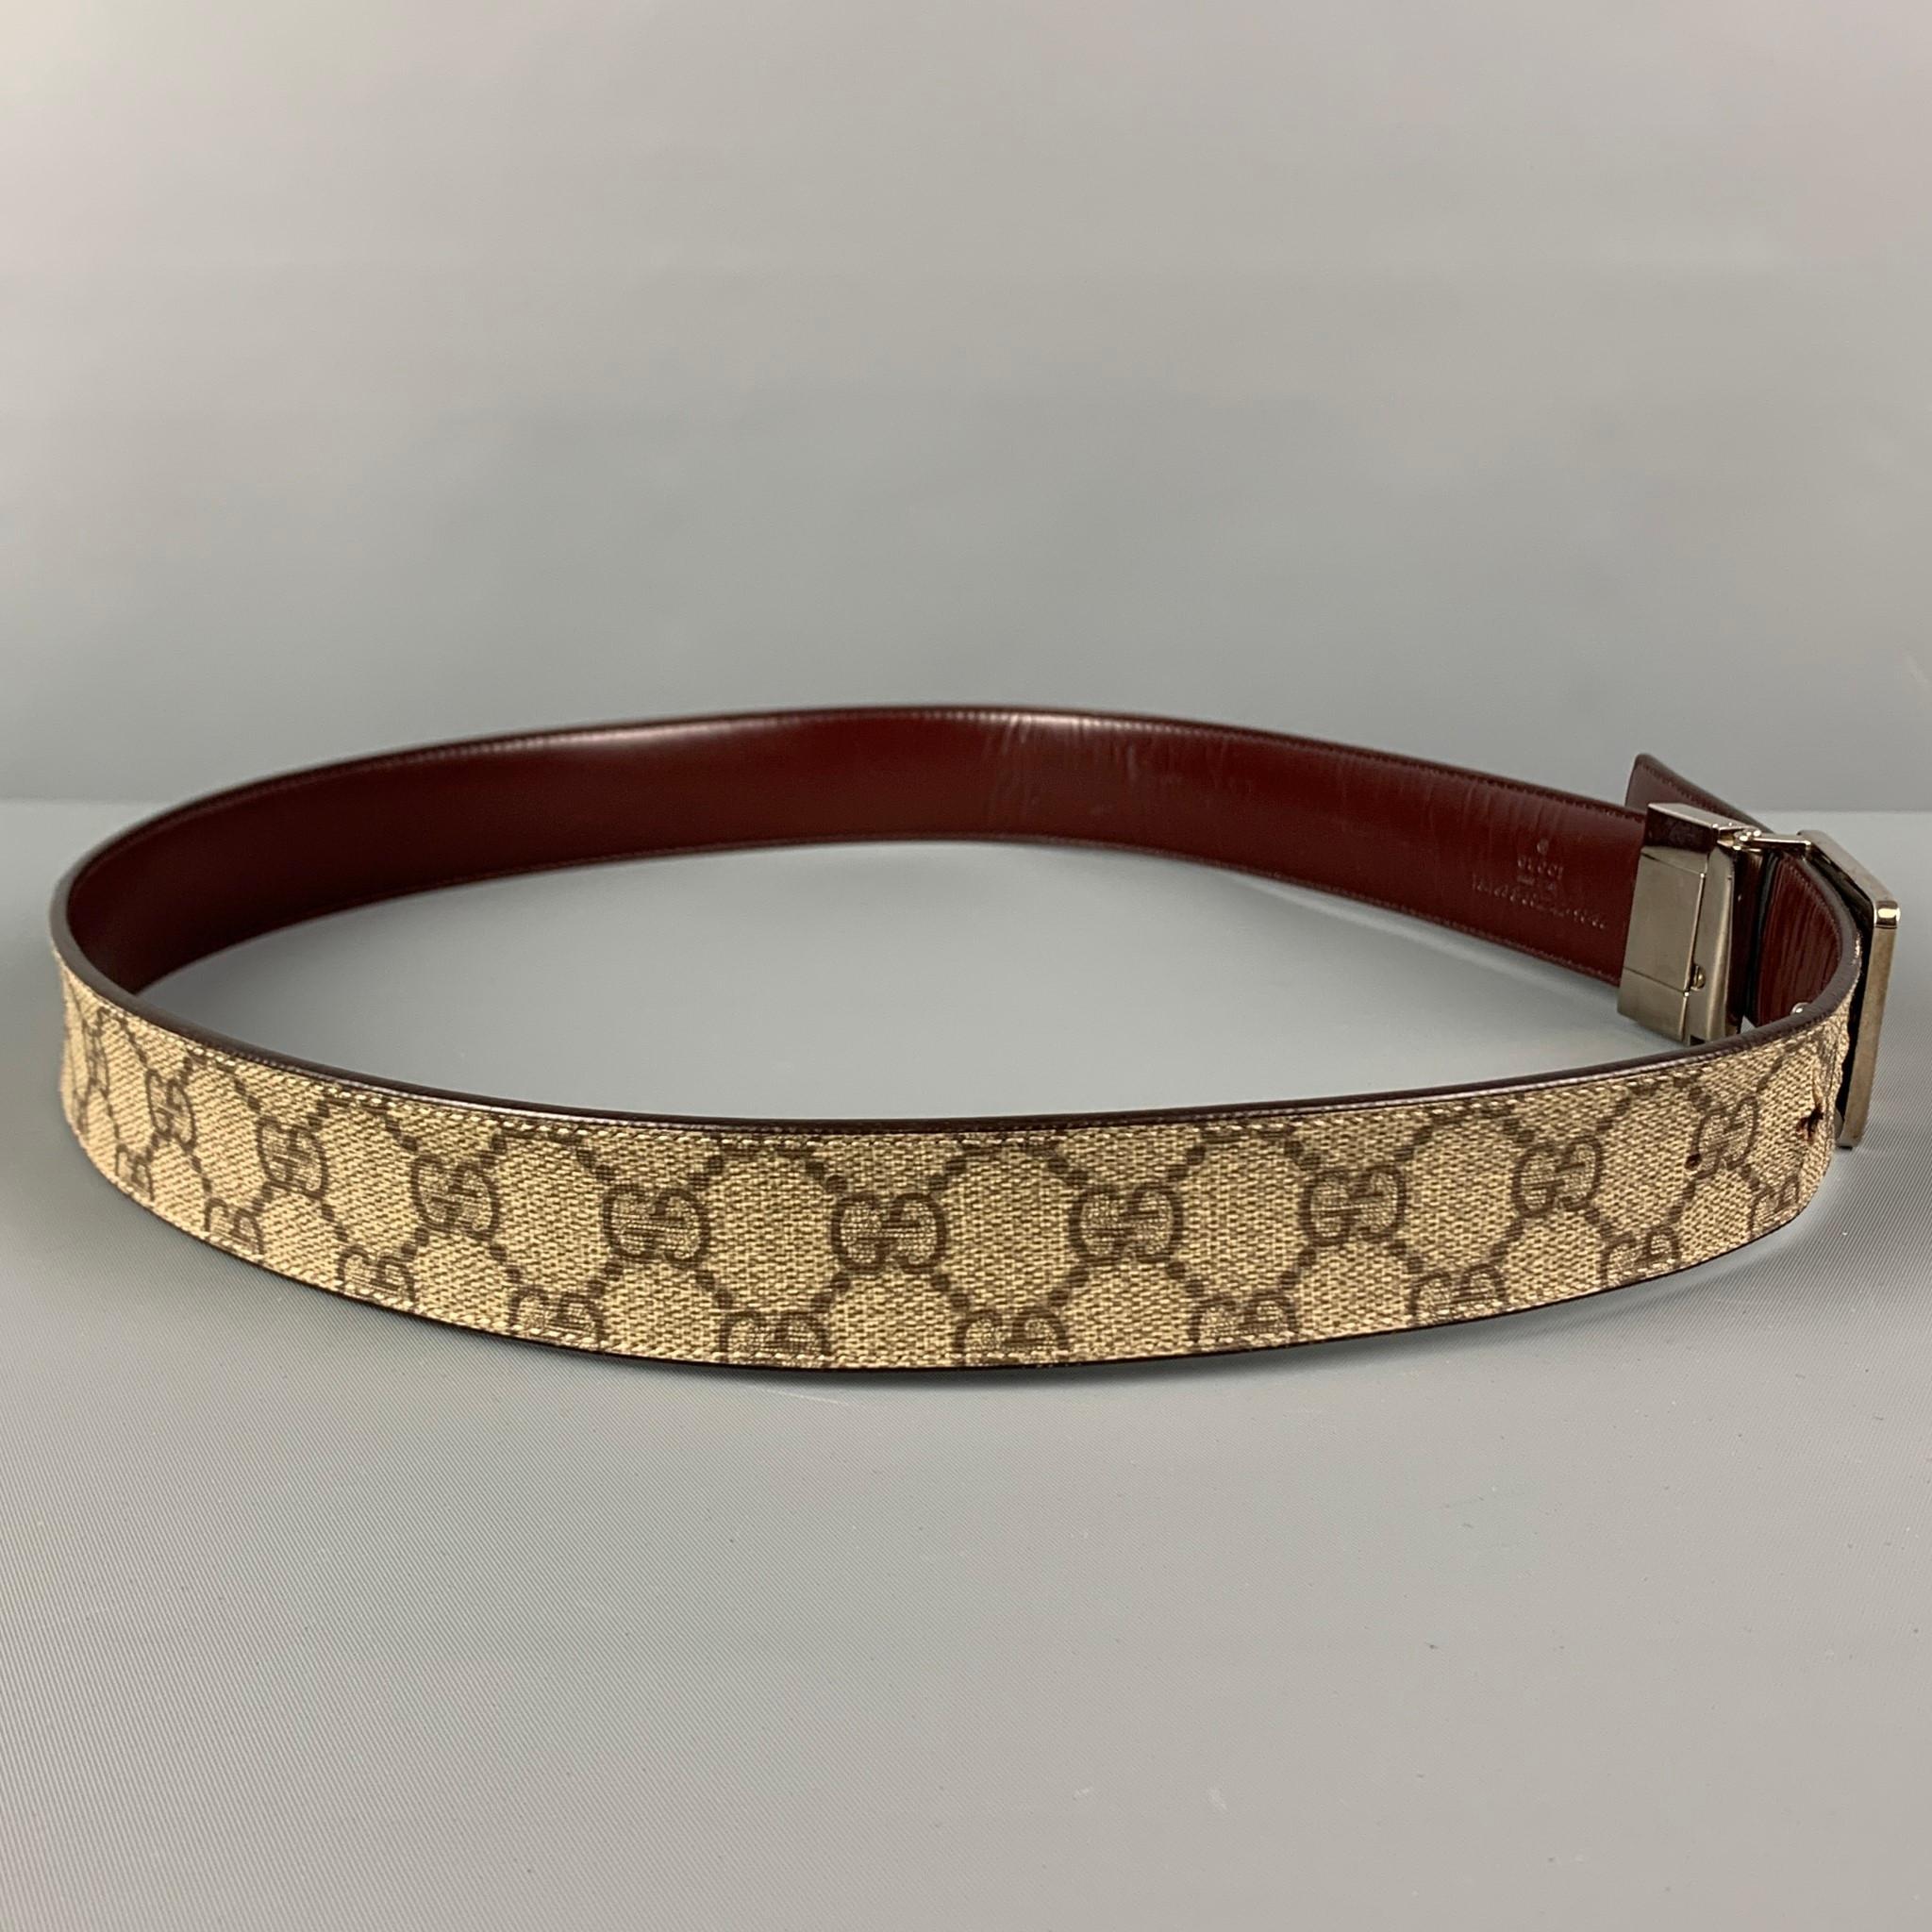 GUCCI belt comes in a beige & brown 'Guccisima' print coated canvas featuring reversible burgundy leather style and a silver tone logo buckle closure. Made in Italy.

Very Good Pre-Owned Condition.
Marked: 154633-502742-90-36

Length: 39.5